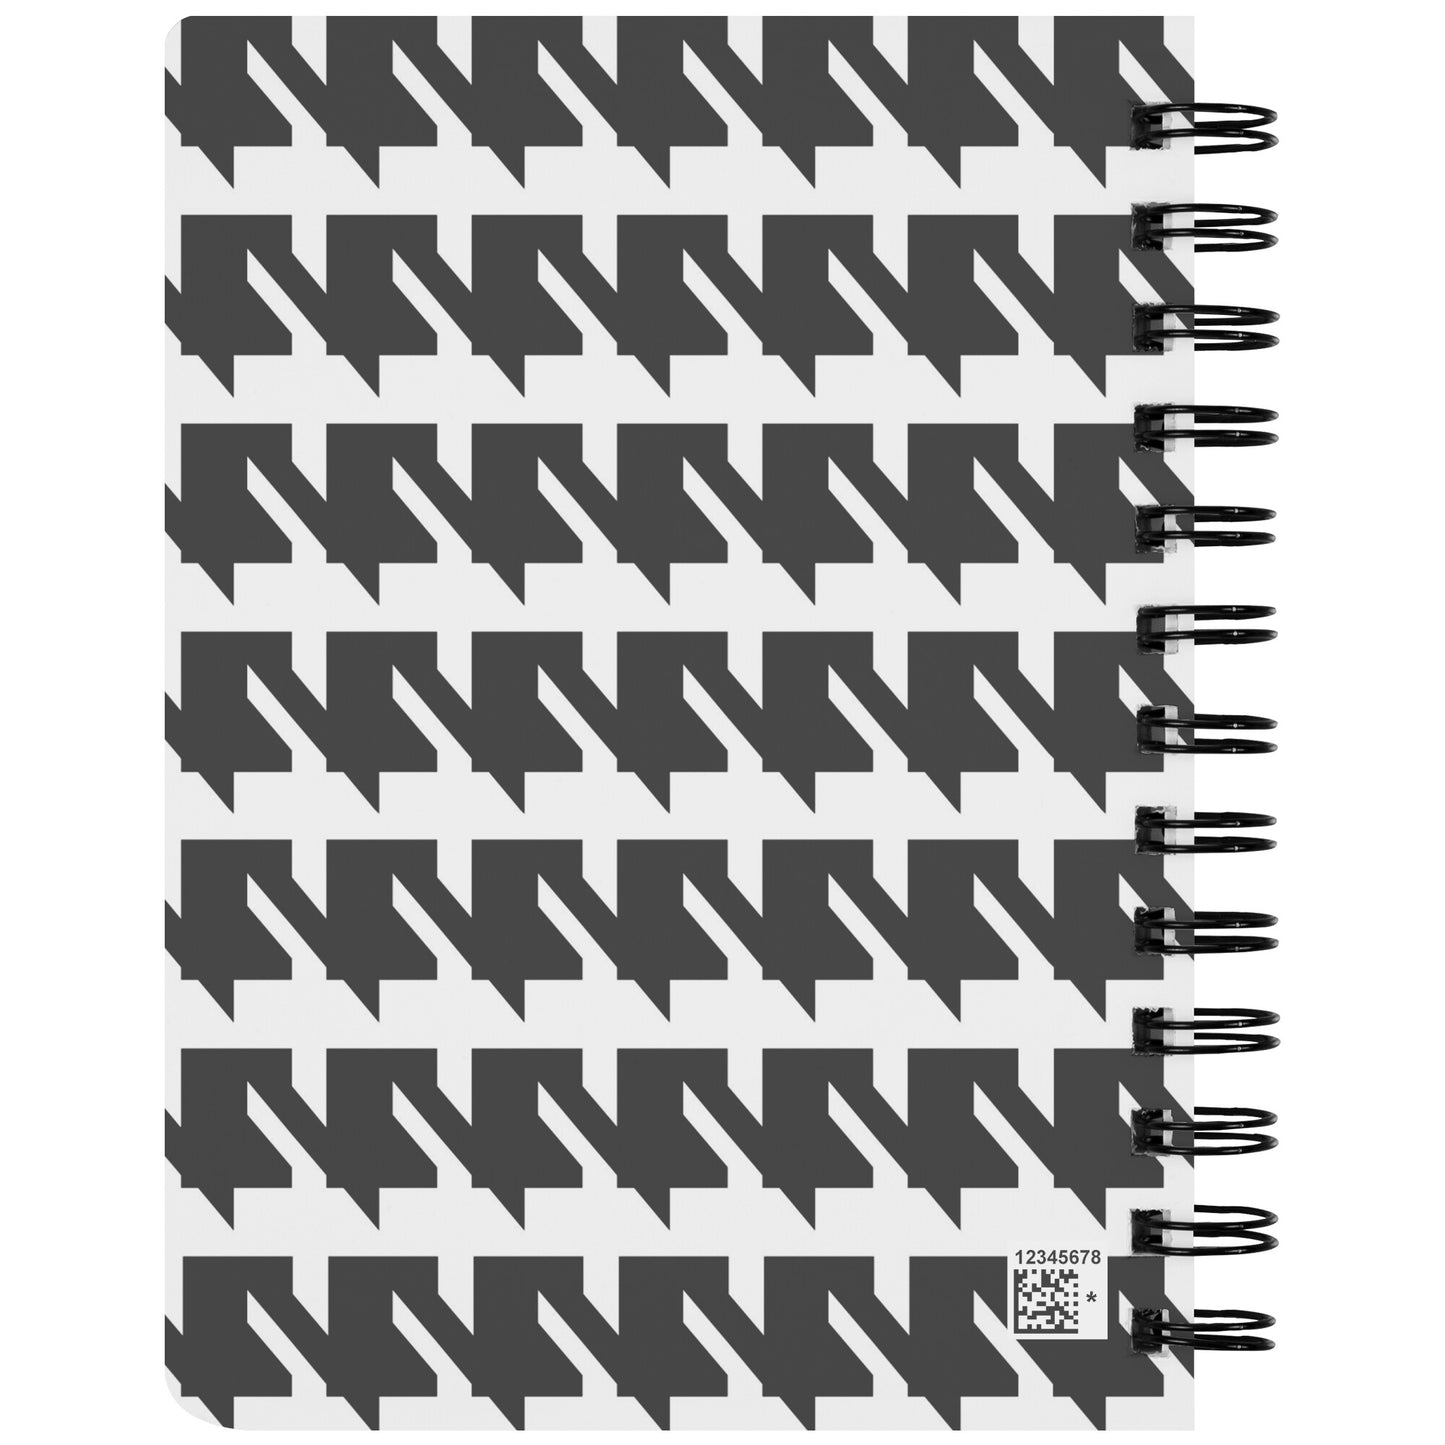 Blessed Houndstooth Journal